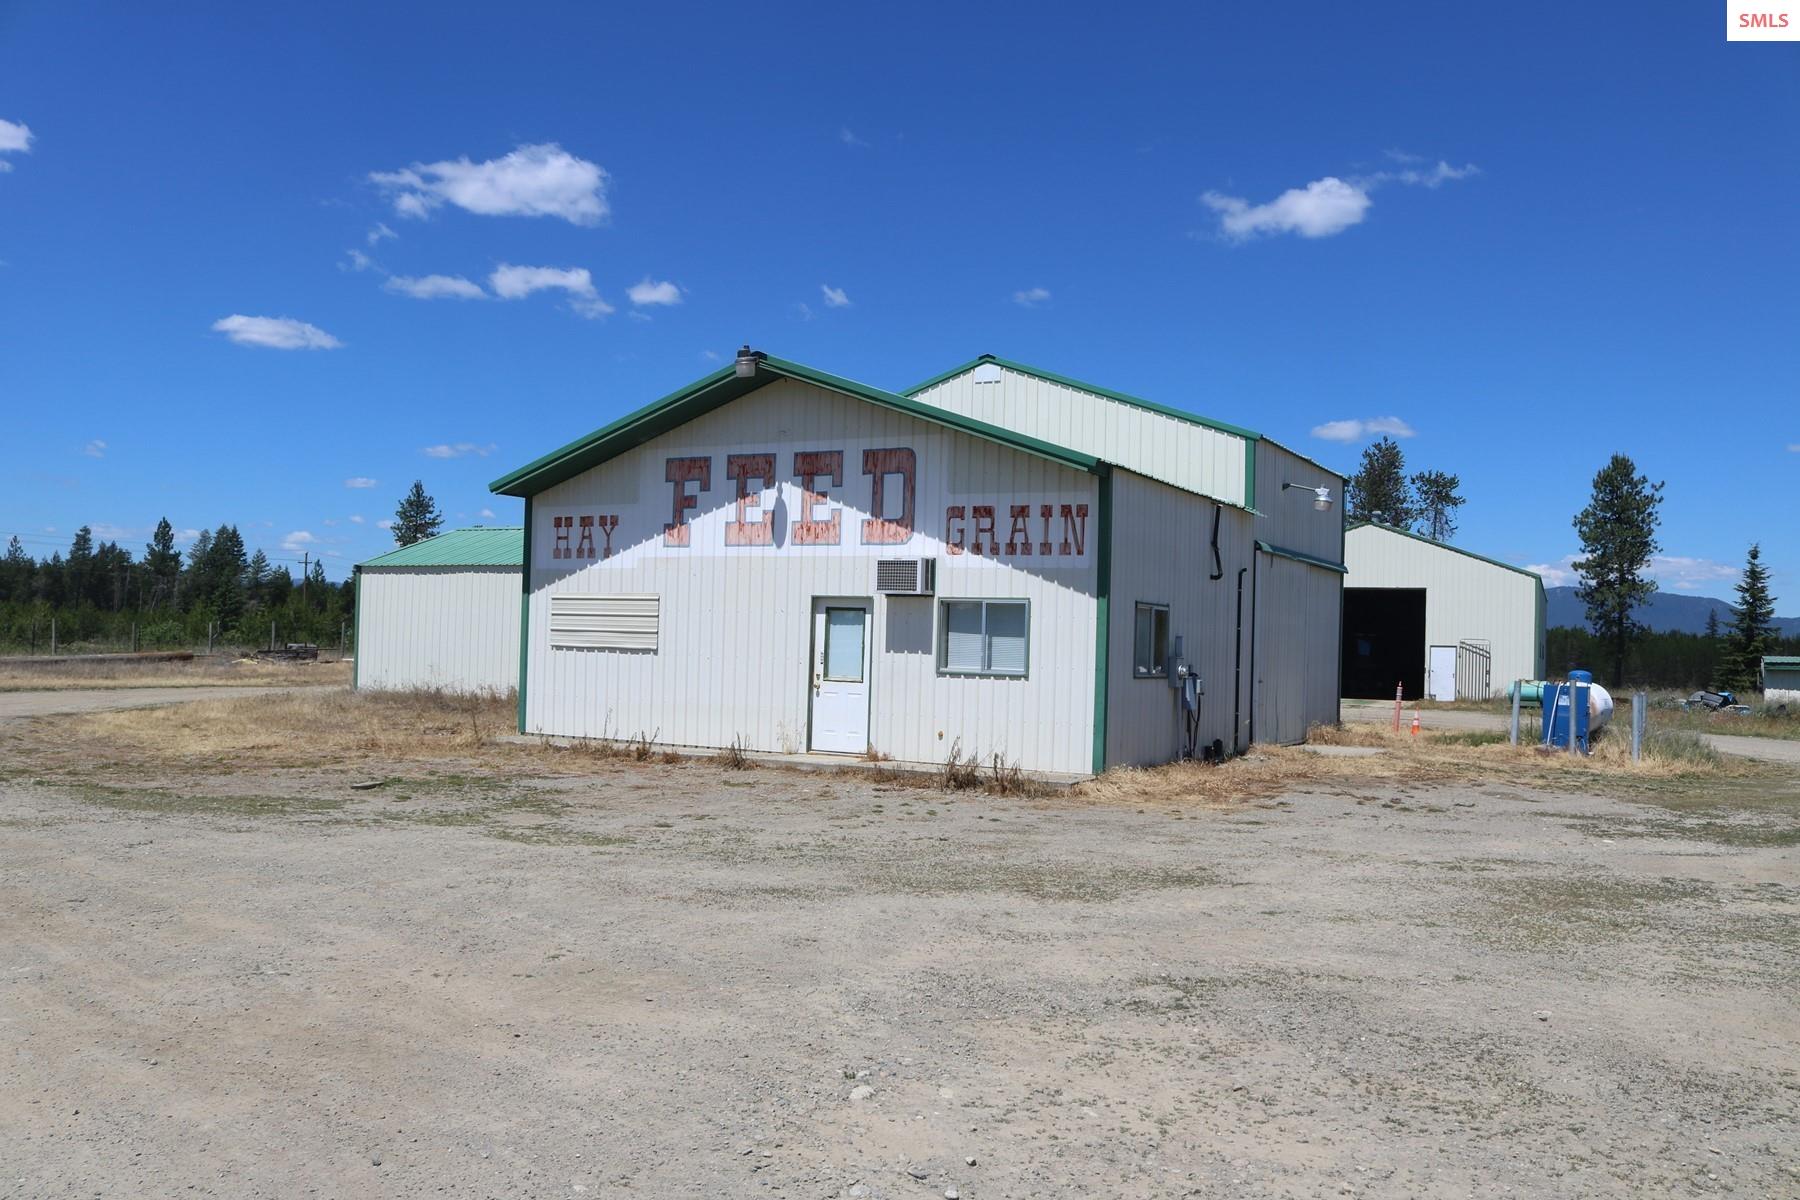 Public remarks: Attention Investors, Developers, Entrepreneurs, large parcel with high visibility Hwy 95 Frontage in the booming town of Athol. With the layout this property is perfect for many commercial activities like storage units, store, manufacturing, home based businesses, etc. Less than ½ mile to the new SUPER 1 Complex and 20 minutes to Hayden/CDA. 9 level acres w/ 3 Phase power, Outbuildings (48x90, & 40x40 w/ a front office of 24x36), 15 gpm shared well, and so much more - SEE FEATURE SHEET! 48x90 insulated shop with concrete floor. Has a ''feed store'' conditional use permit. Driveways built to hold Semi-Truck traffic. The comfortable home on the property is 1 bed/1 bath. There is a pad for double-wide. Rental income $6,300/mo. NO CCR'S or HOA. LOCATION!! Owner terms and Submit all offers!